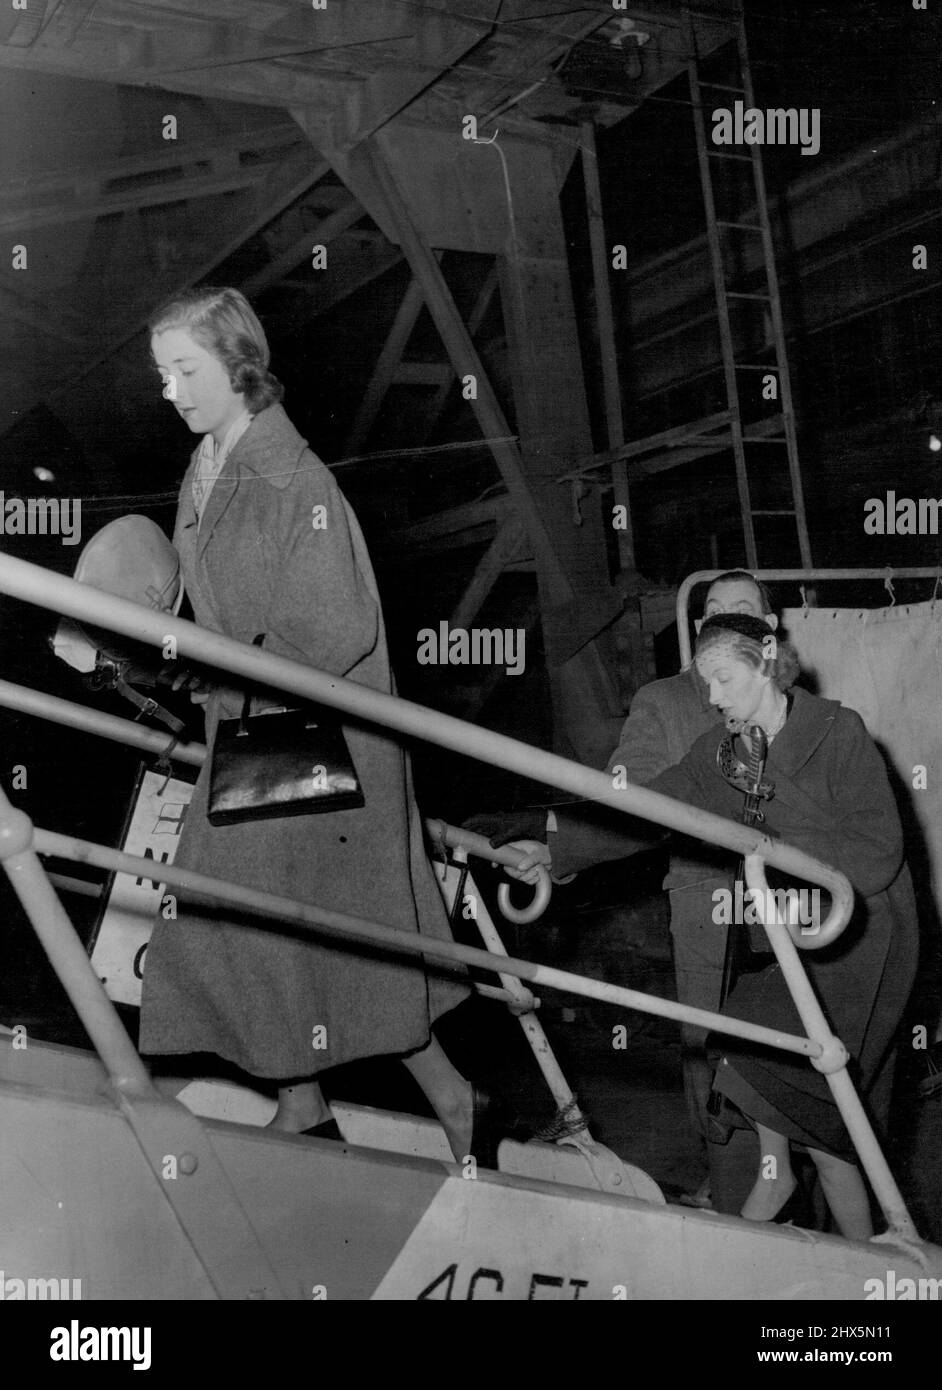 Boarding Royal Tour Liner - To Wish 'Bon Voyage' To Lord Althorp -- Lady Fermoy (carrying sword) follows her daughter, seventeen-year-old Miss Frances Roche, up the gangway to board the Royal tour liner Gothic at King George V Dock, London, this evening (Tuesday). They were going aboard to wish 'bon voyage' to Viscount Althorp (fiance of Miss Roche) who is Equerry to the Queen. Later the liner was leaving for Jamaica where the Queen and the Duke of Edinburgh will go aboard on November 27 for the start of the royal tour of Australia and New Zealand. The Gothic will take the royal party to the Stock Photo